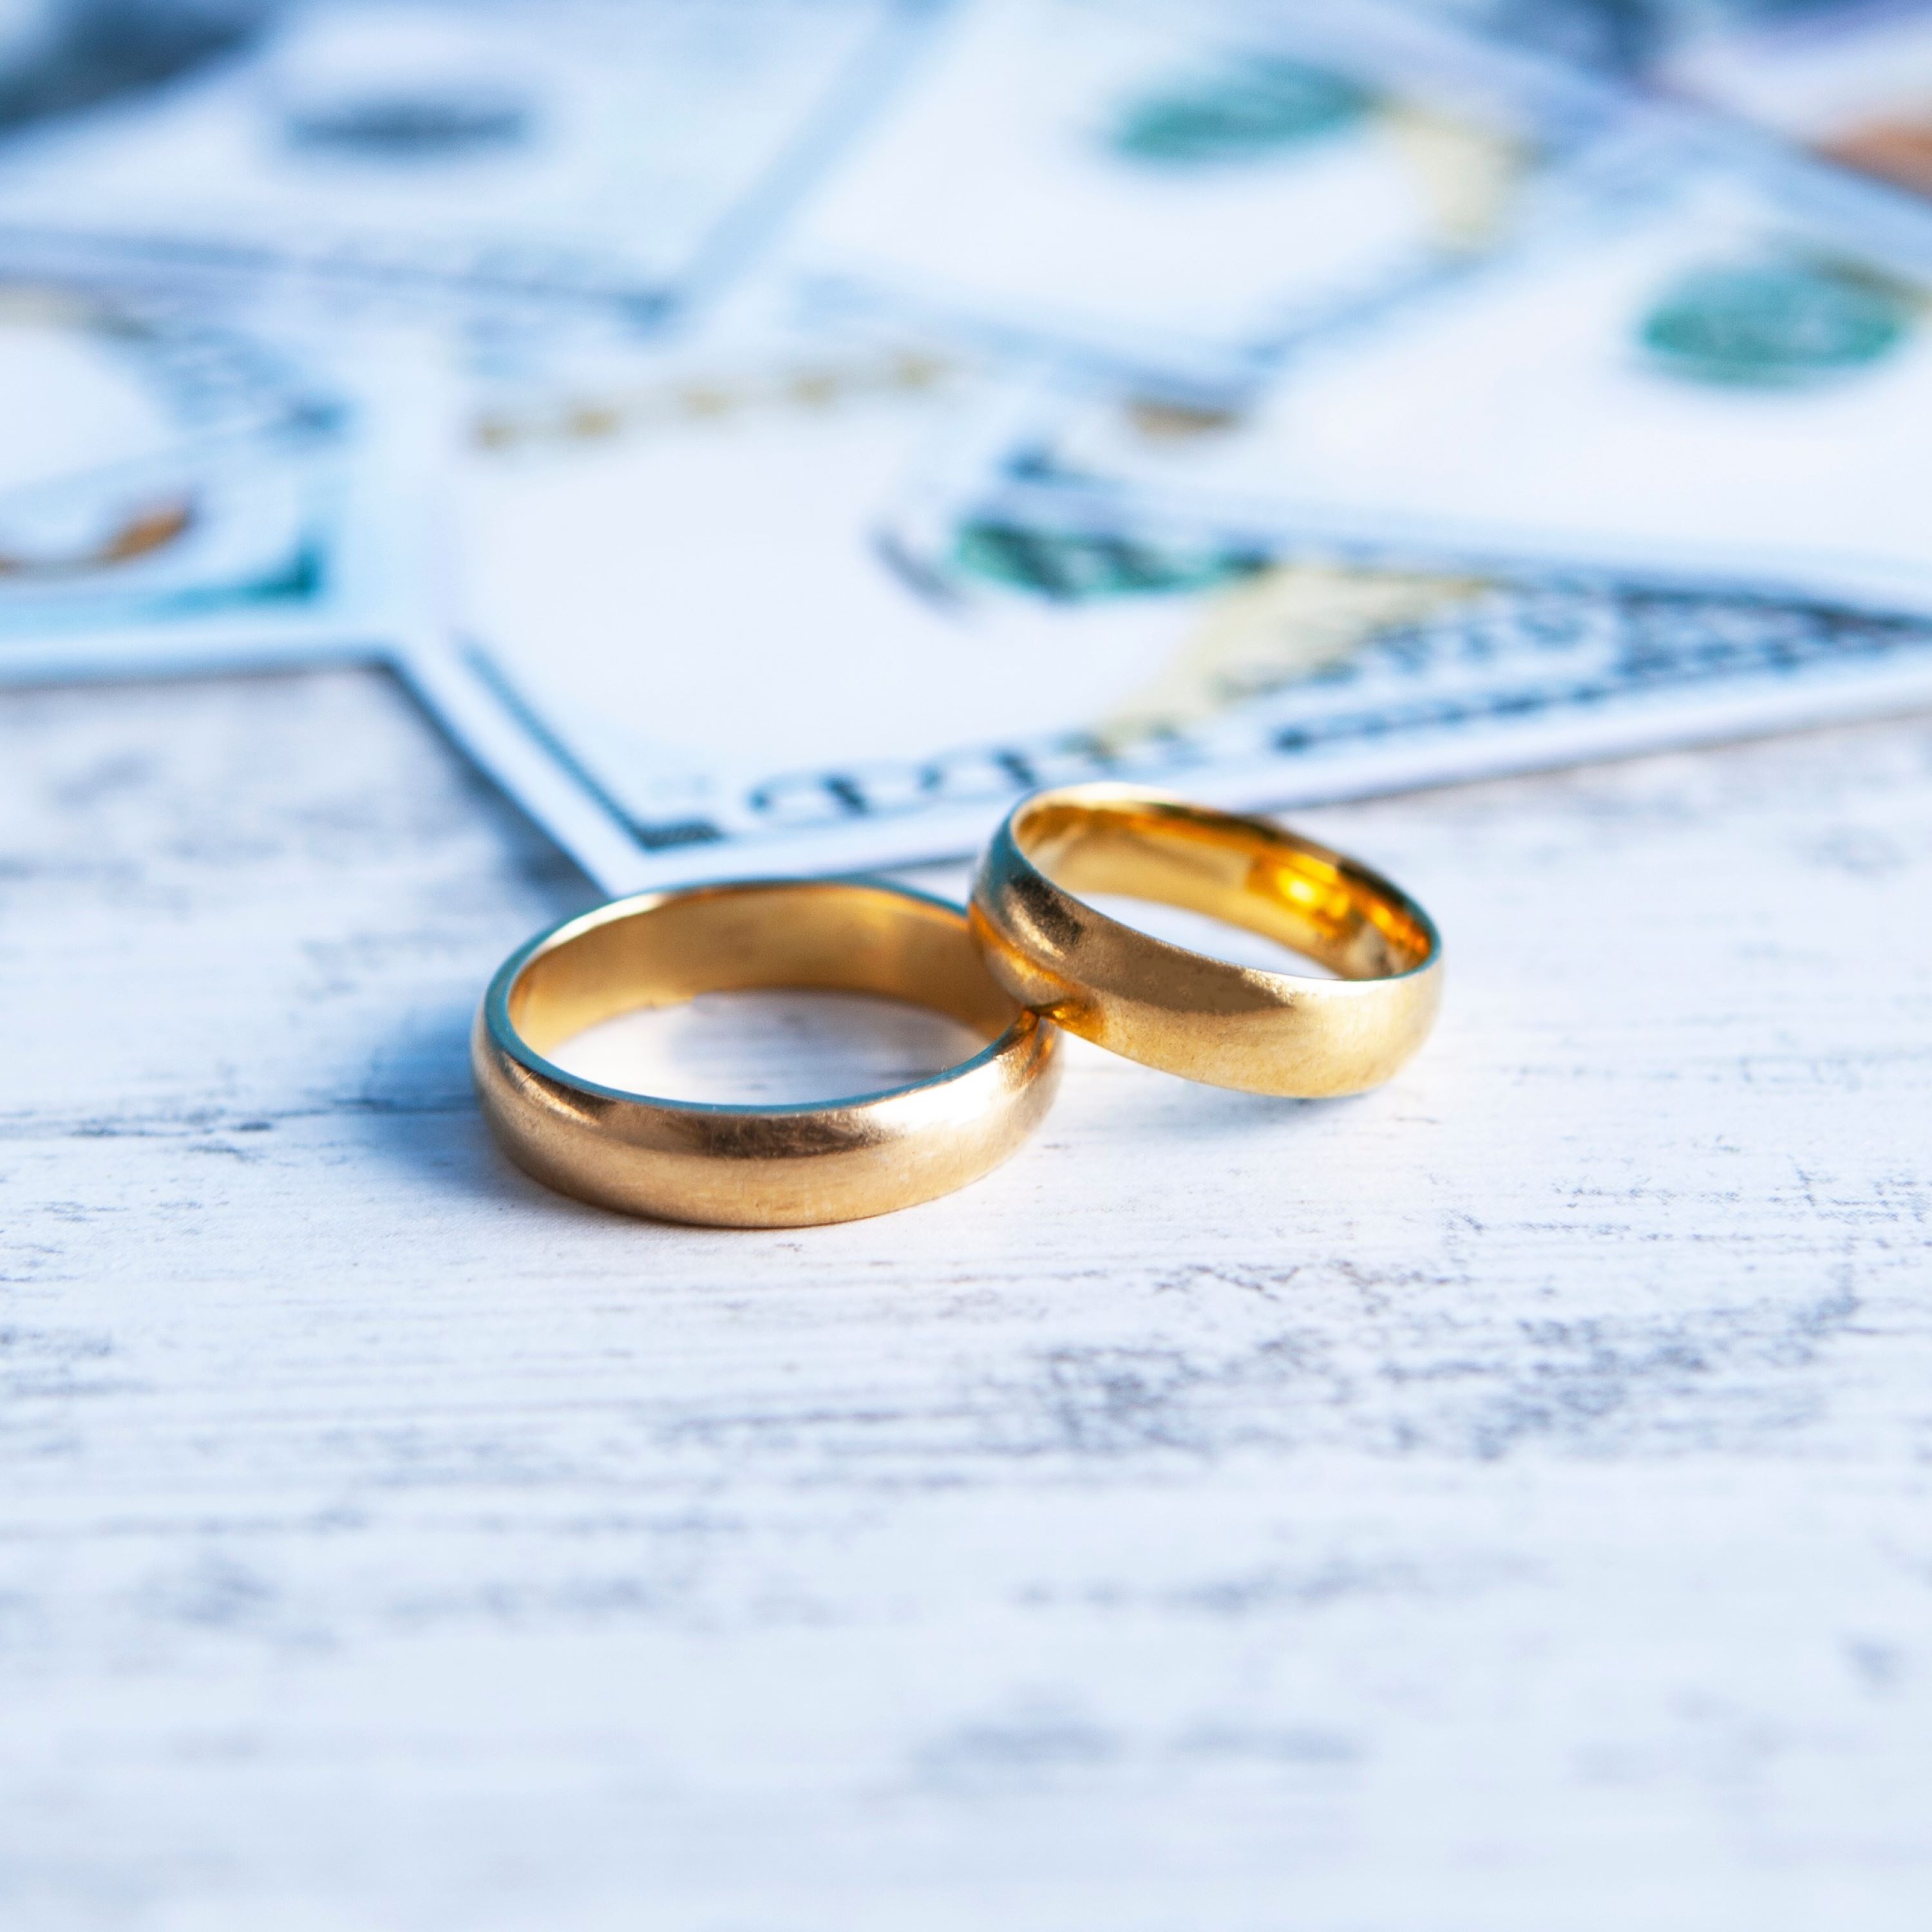 Tips for financing your divorce